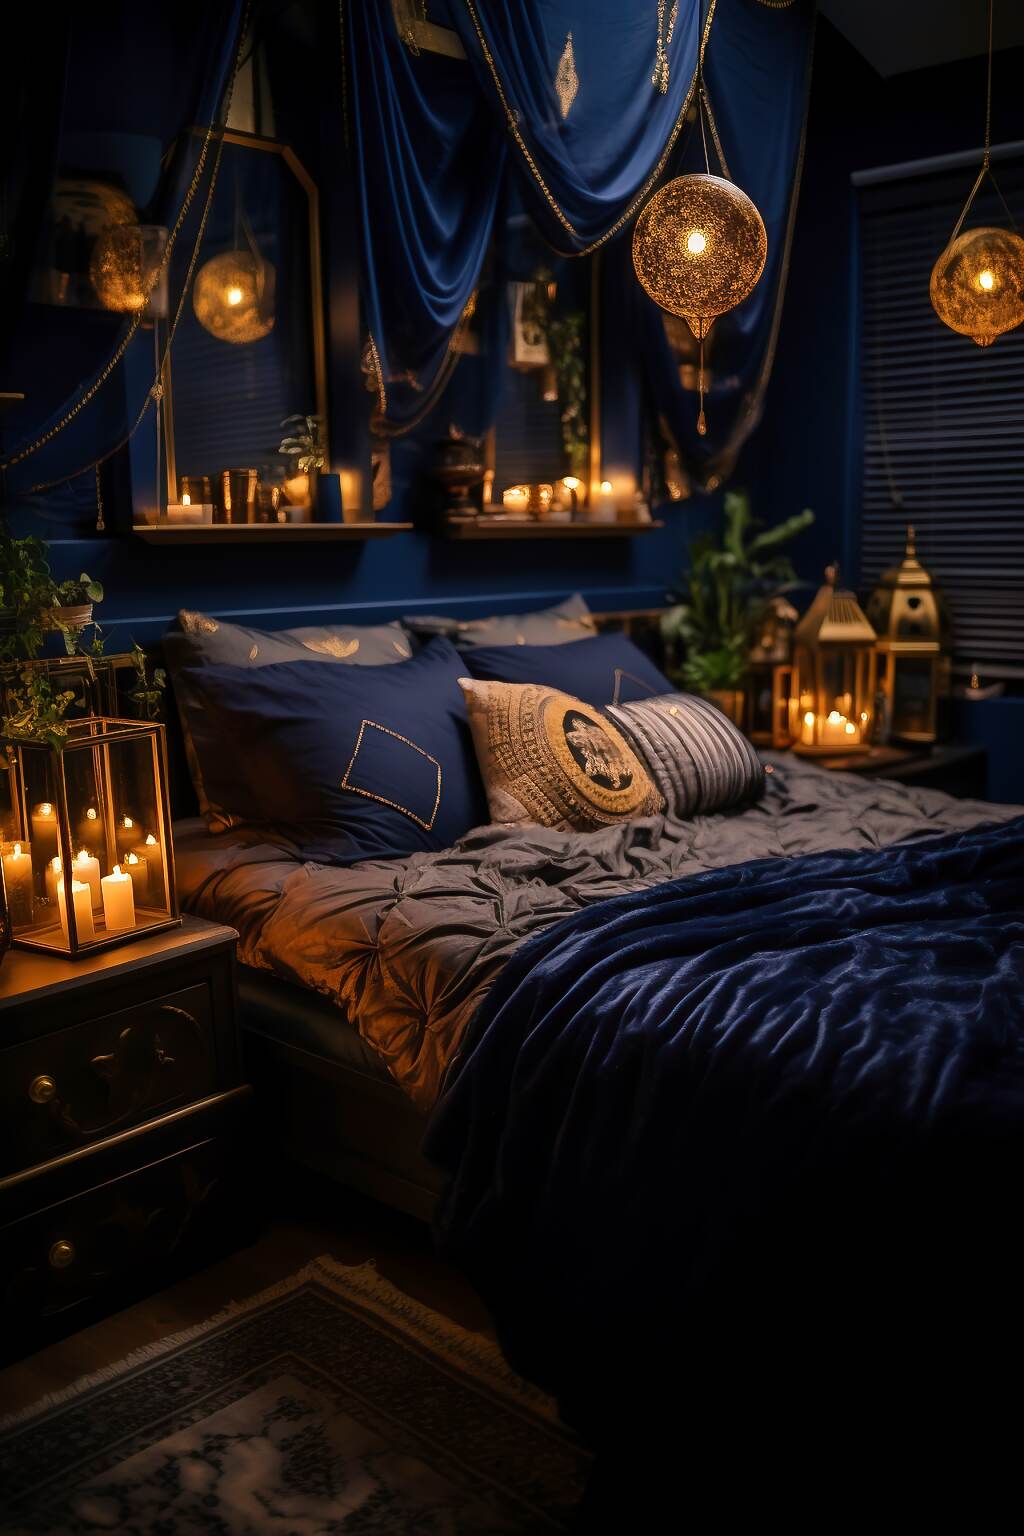 Compact Dark Boho Bedroom With A Blue &Amp; Gold Color Scheme, Featuring Antique Mirrors, Patterned Rugs, And Gold Accents, Creating An Intimate And Luxurious Atmosphere.